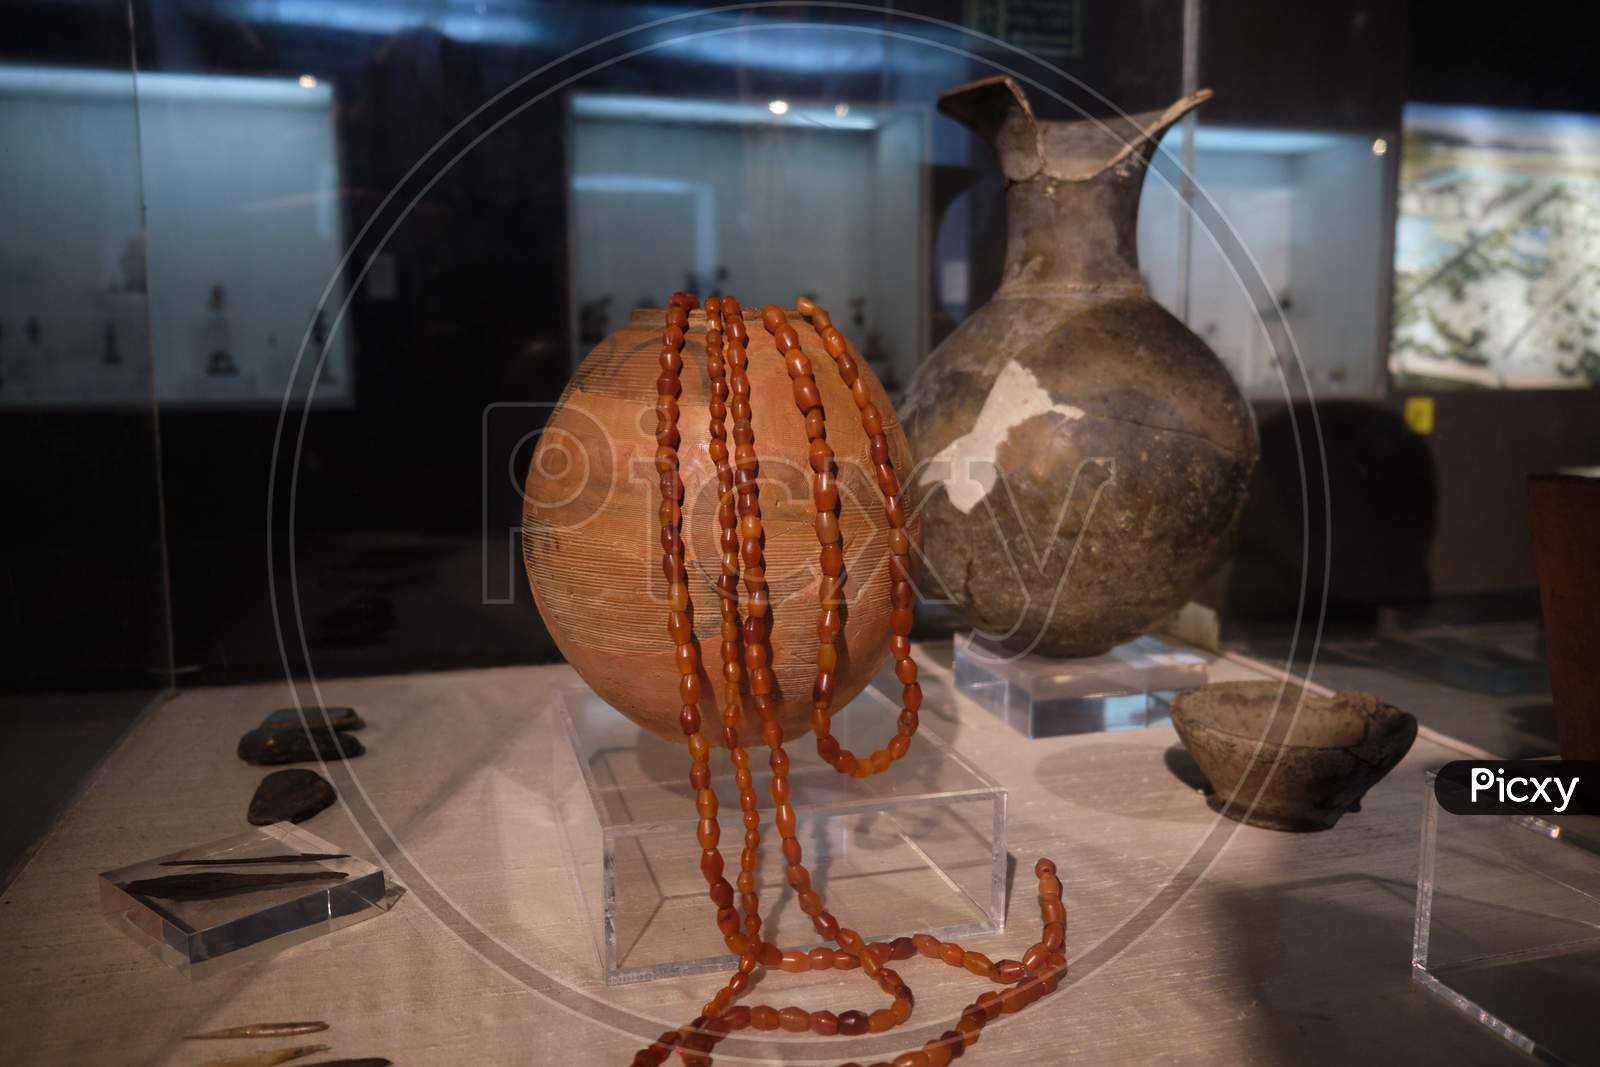 Ancient Pottery Of The Indus Valley Civilization In The National Museum Of India In New Delhi